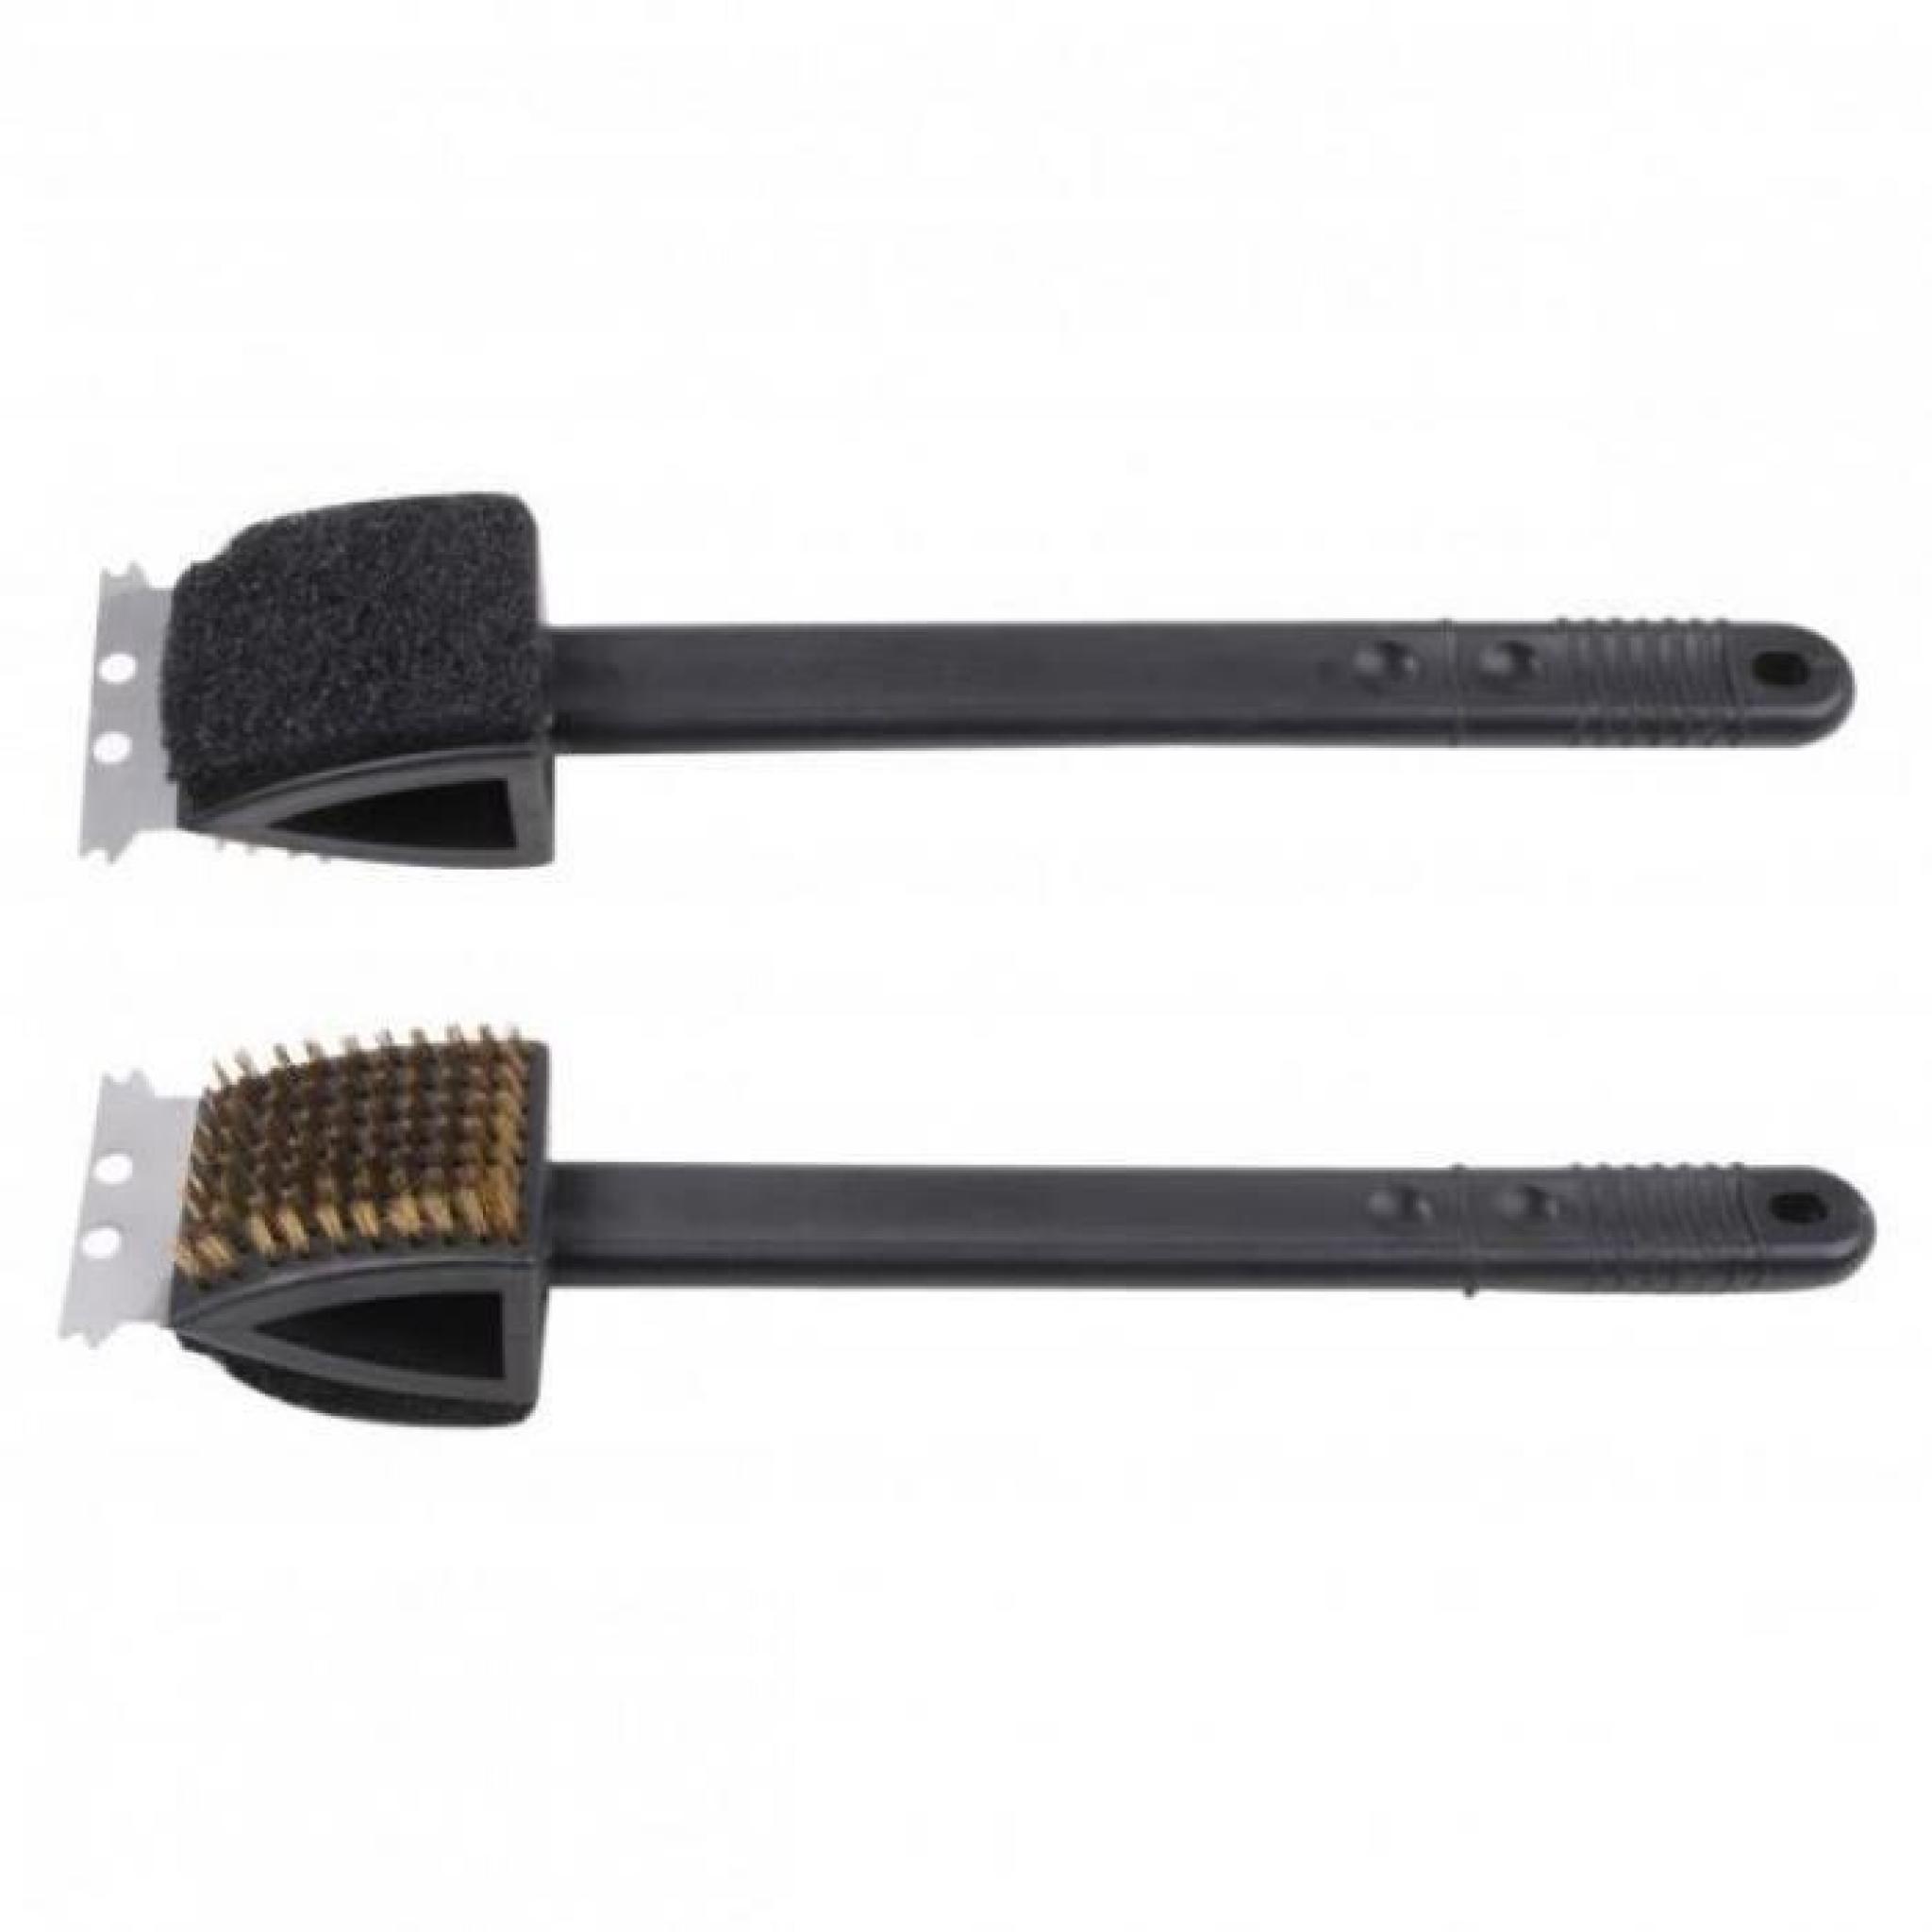 Brosse A Manche Nettoyage Grill Barbecue 3 Fonctions Brosse Grattoir